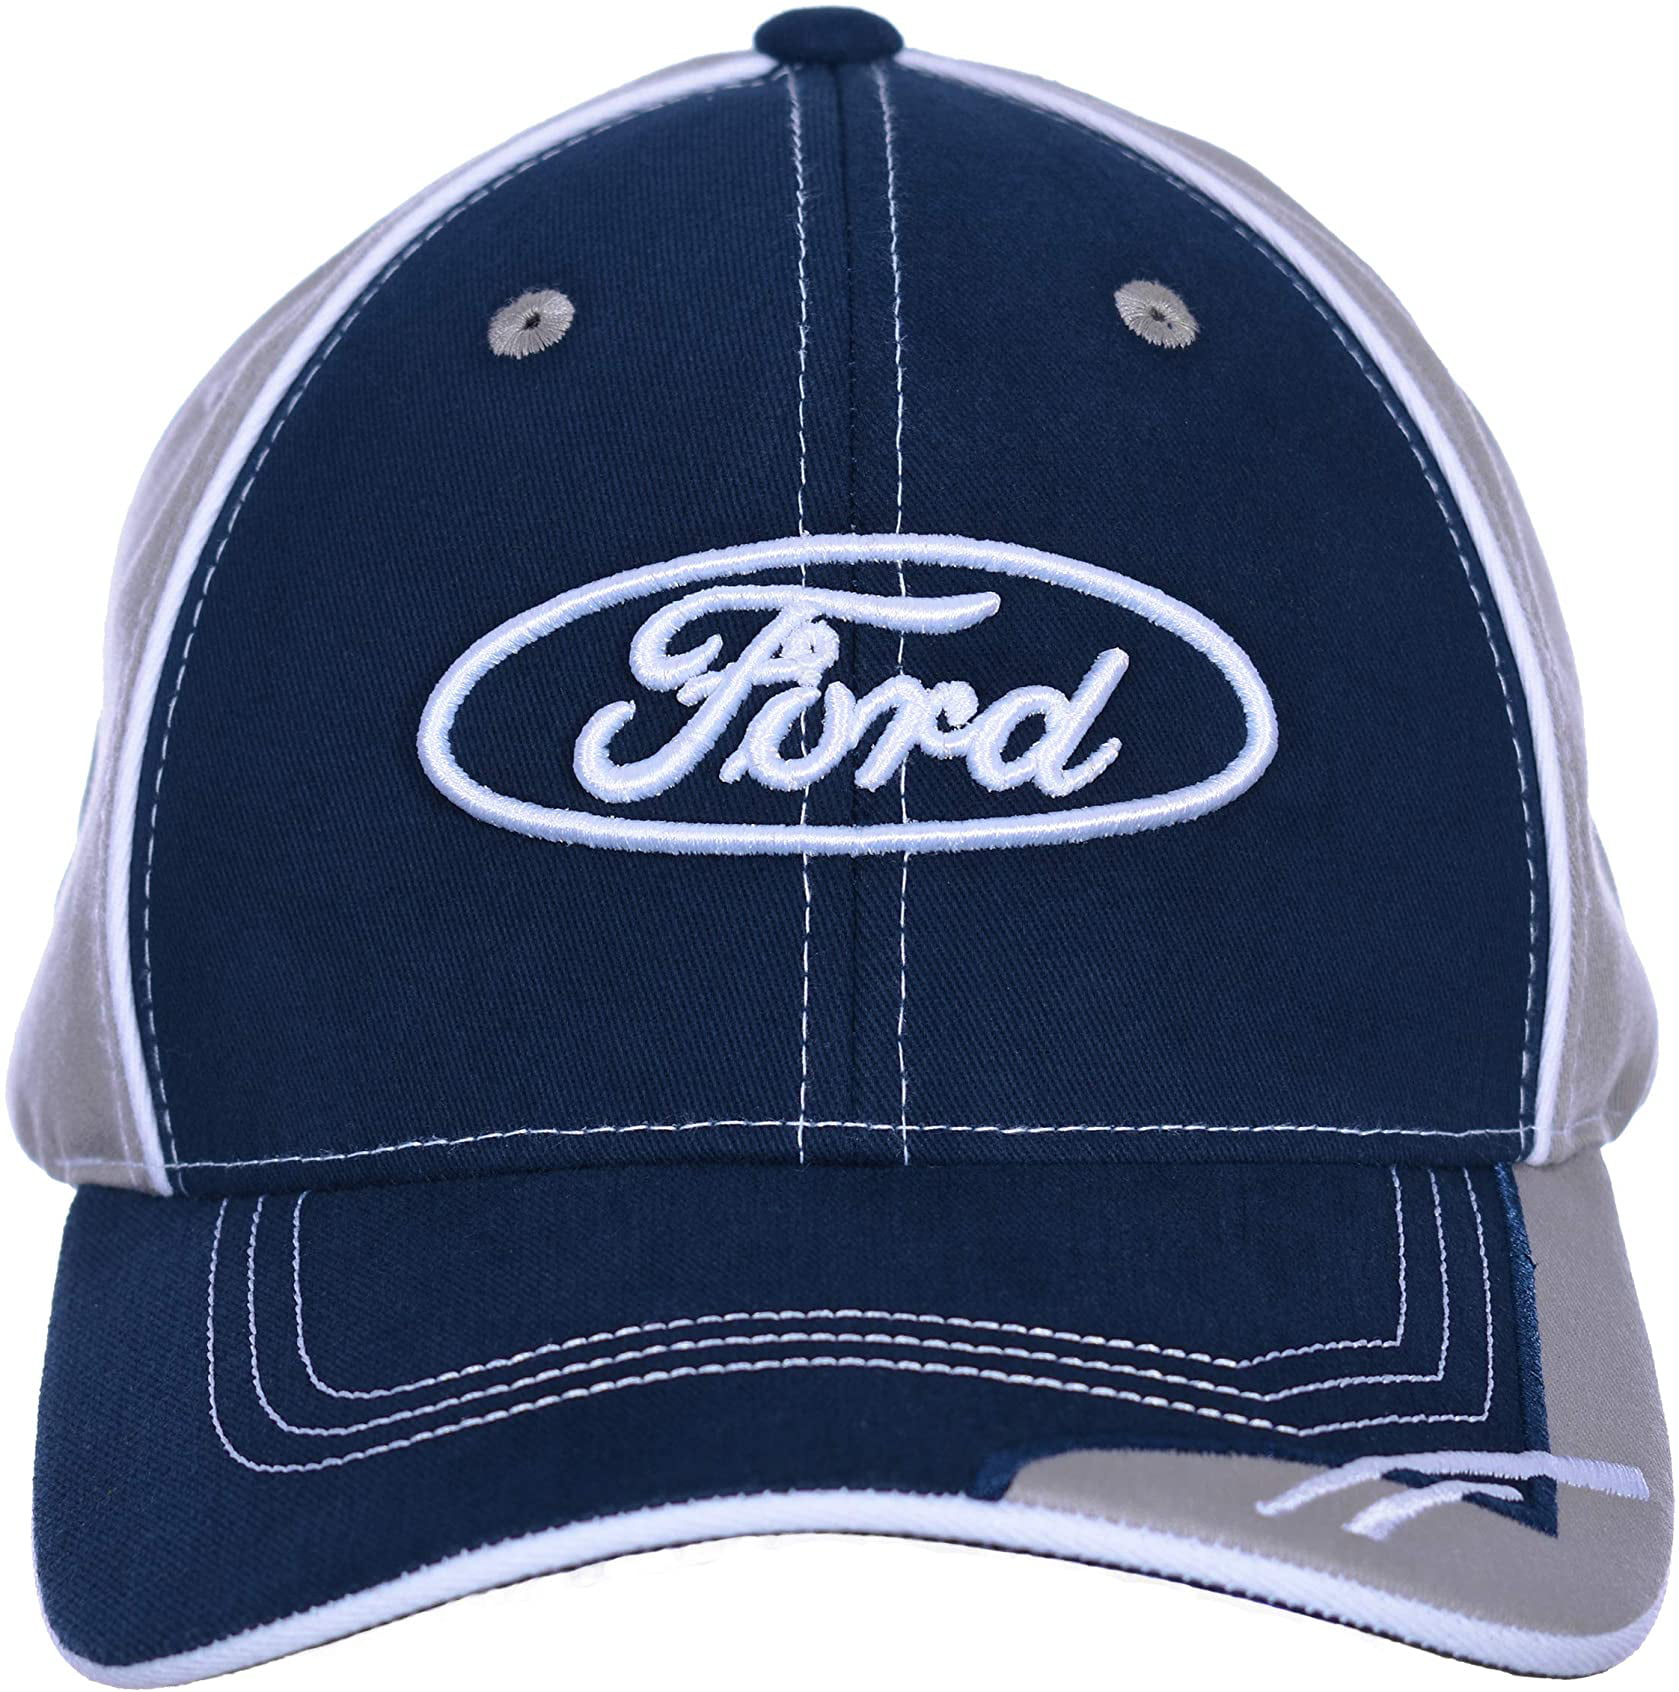 Cap FORD Oval Logo Checkered Flag Sports Blue Adjustable Structured Hat 